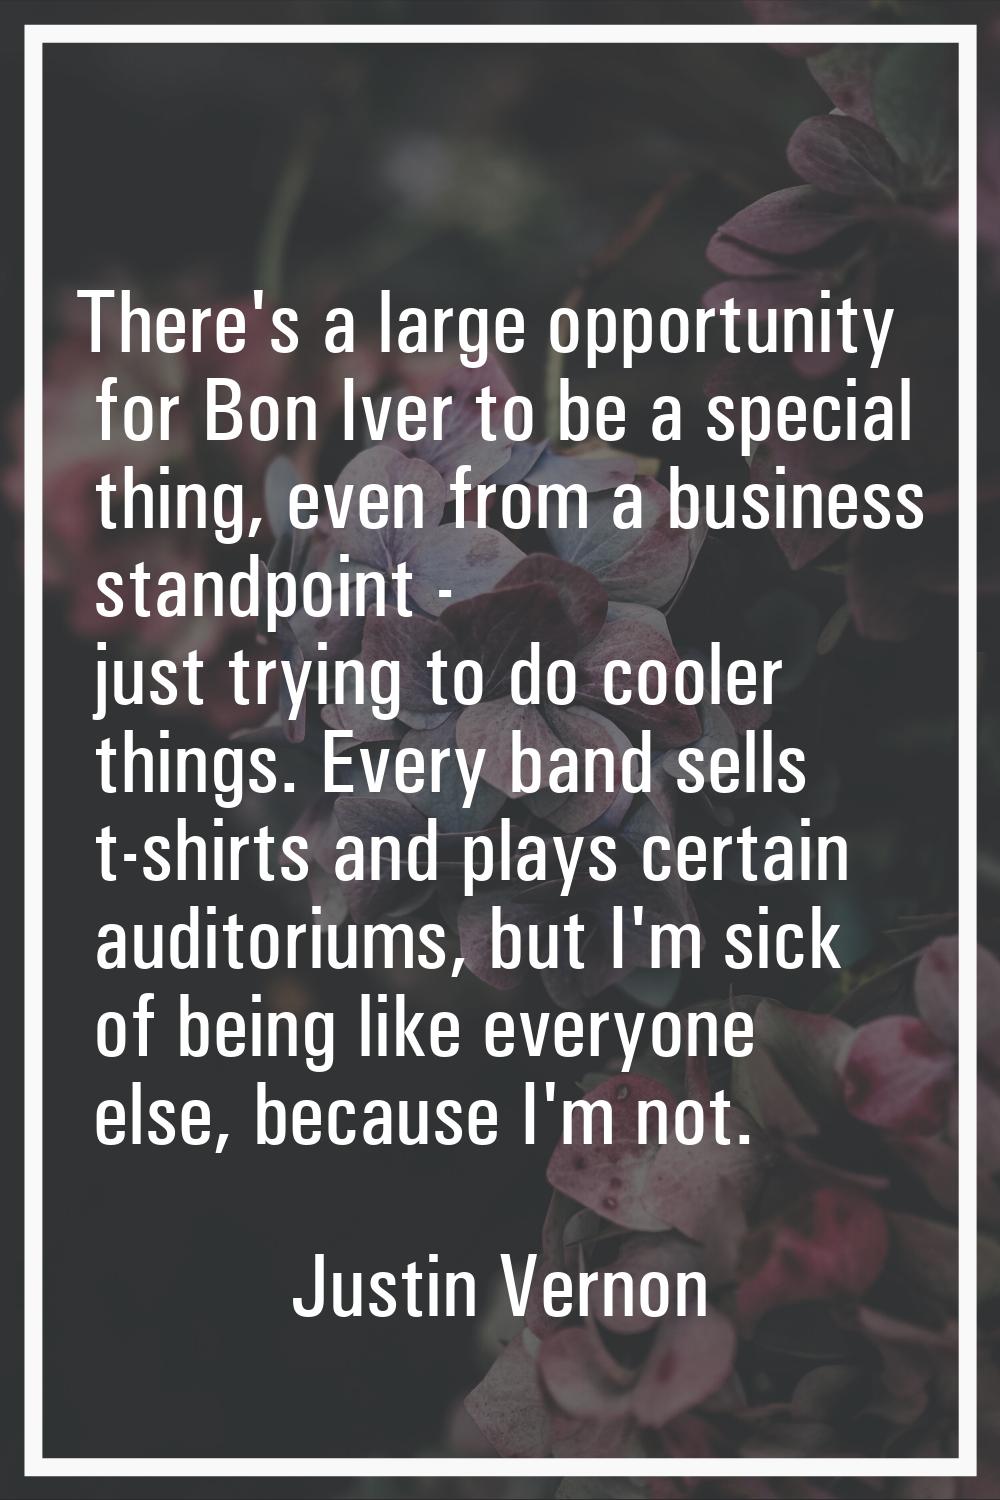 There's a large opportunity for Bon Iver to be a special thing, even from a business standpoint - j